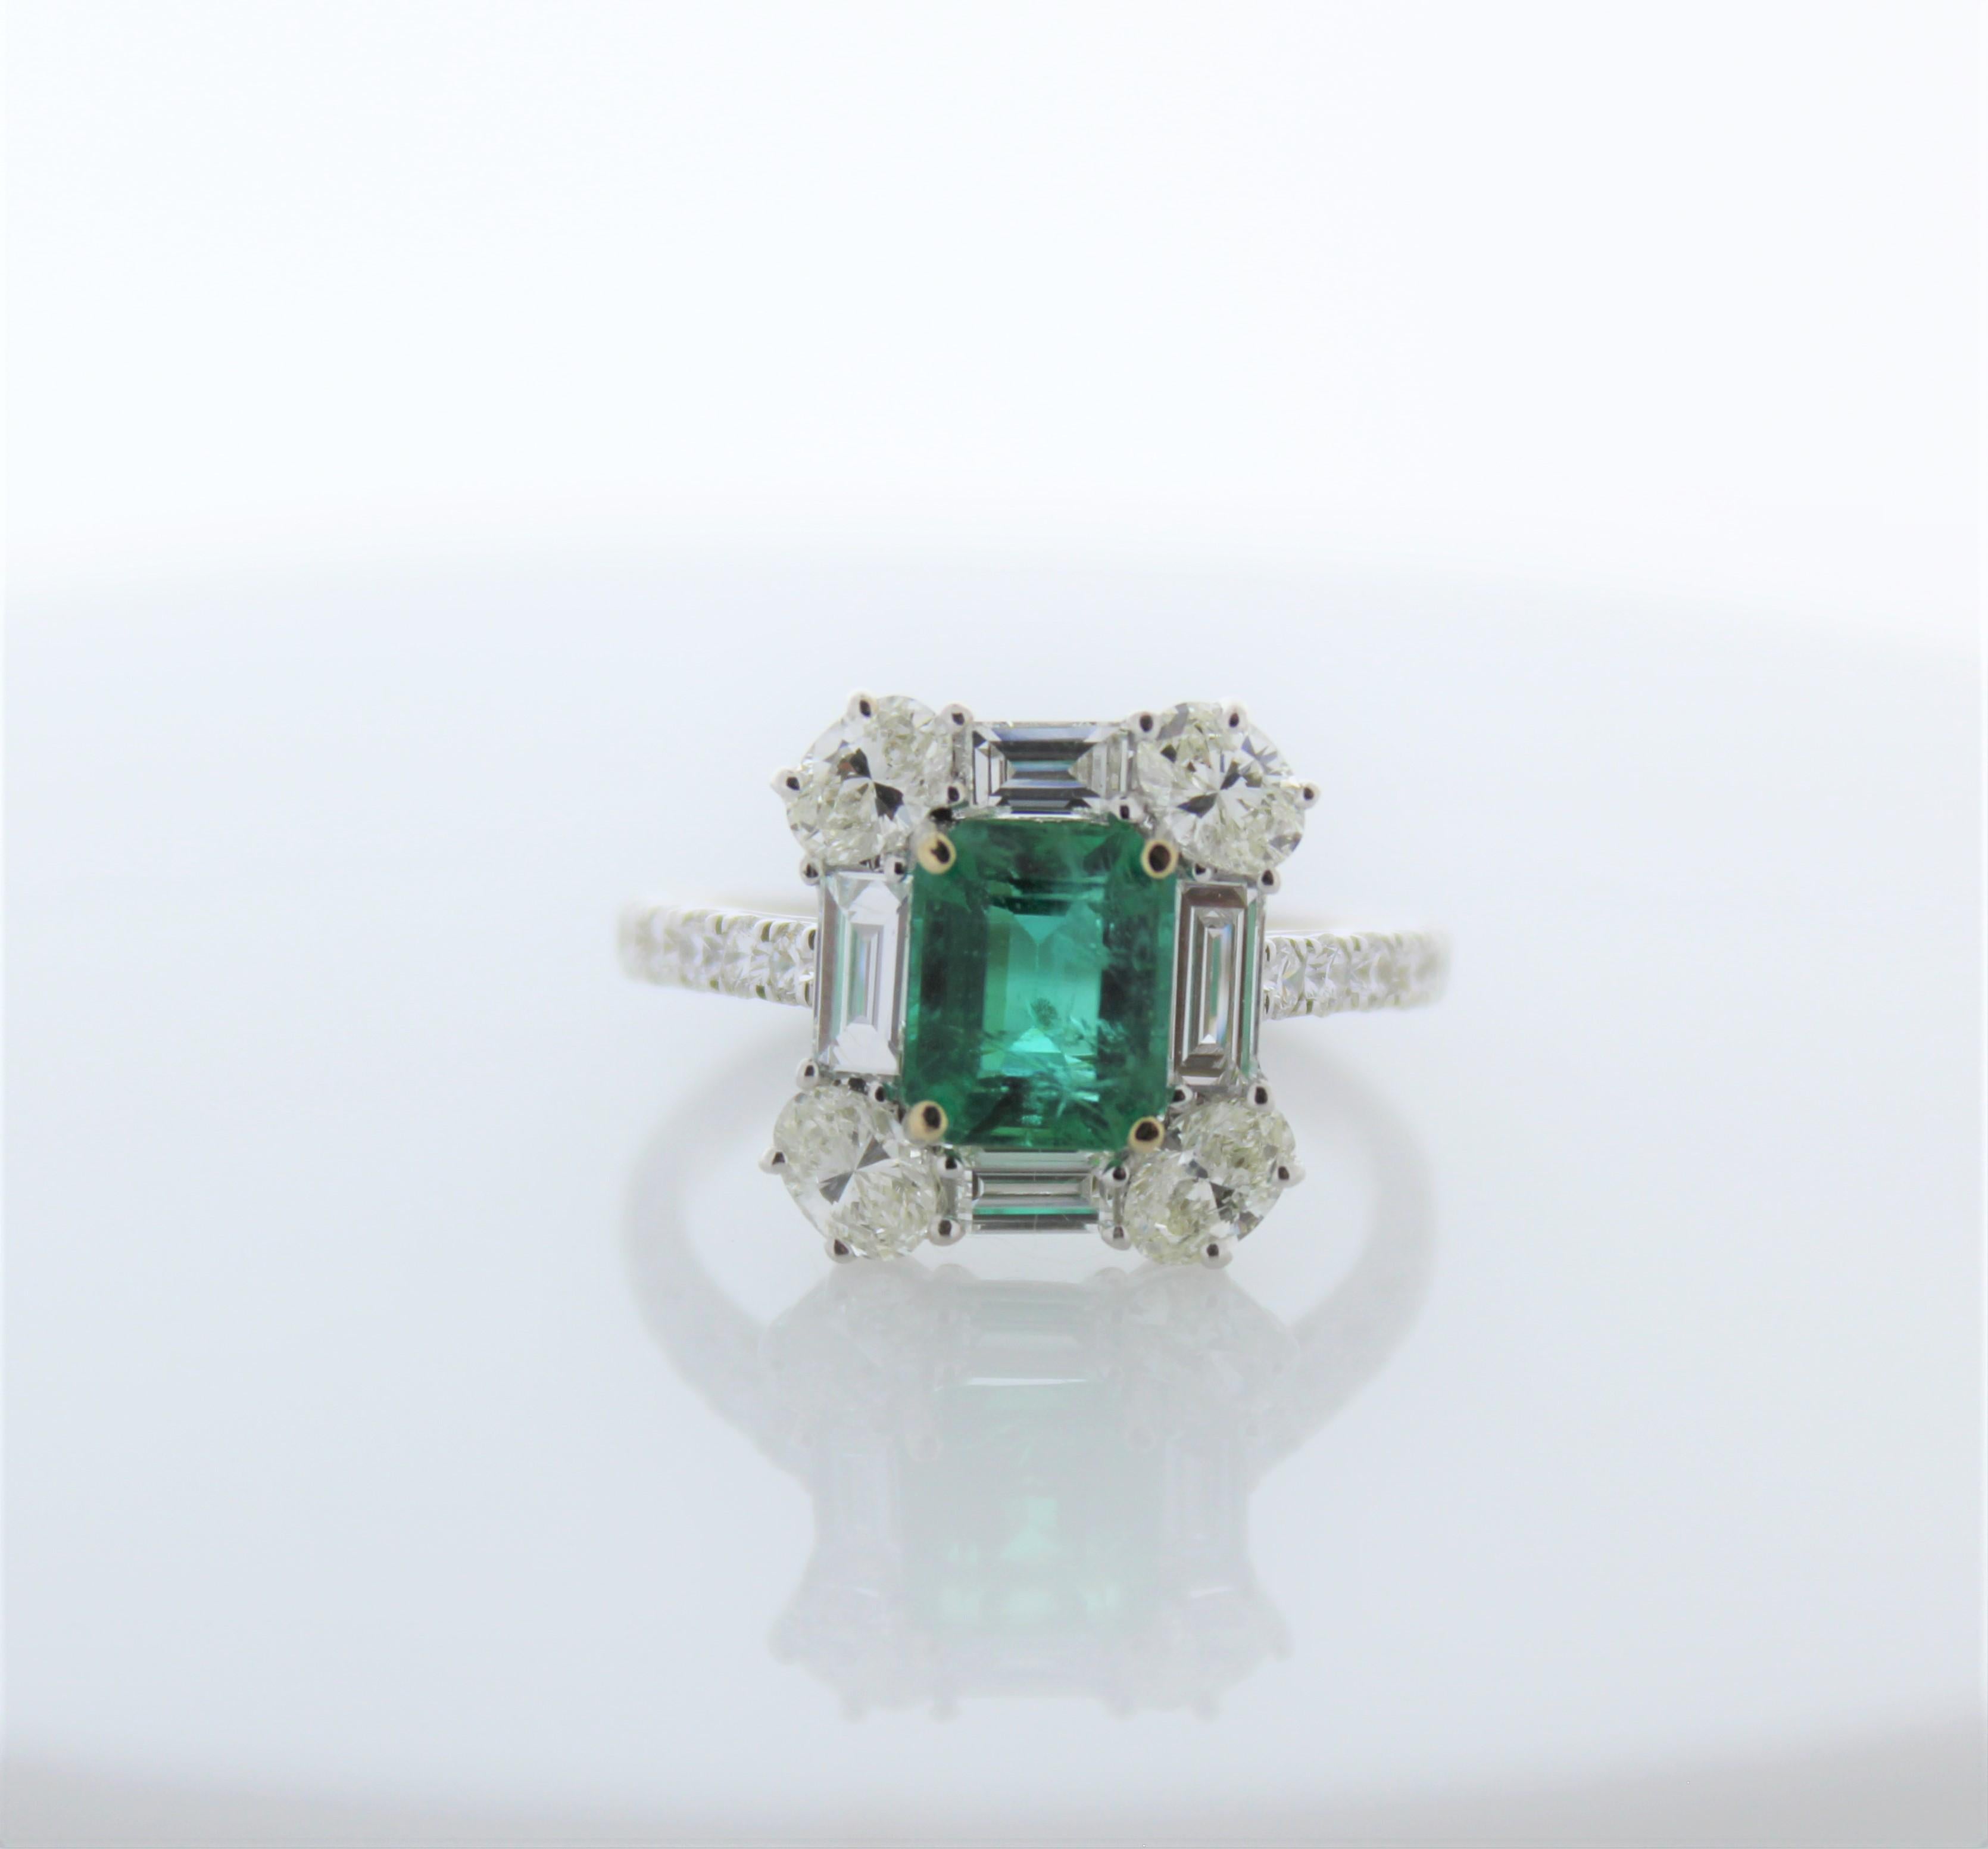 This intricate ring consists of a square green emerald that weighs 1.55 carats. And is surrounded by 20 natural diamonds that total up to 1.63 carats.